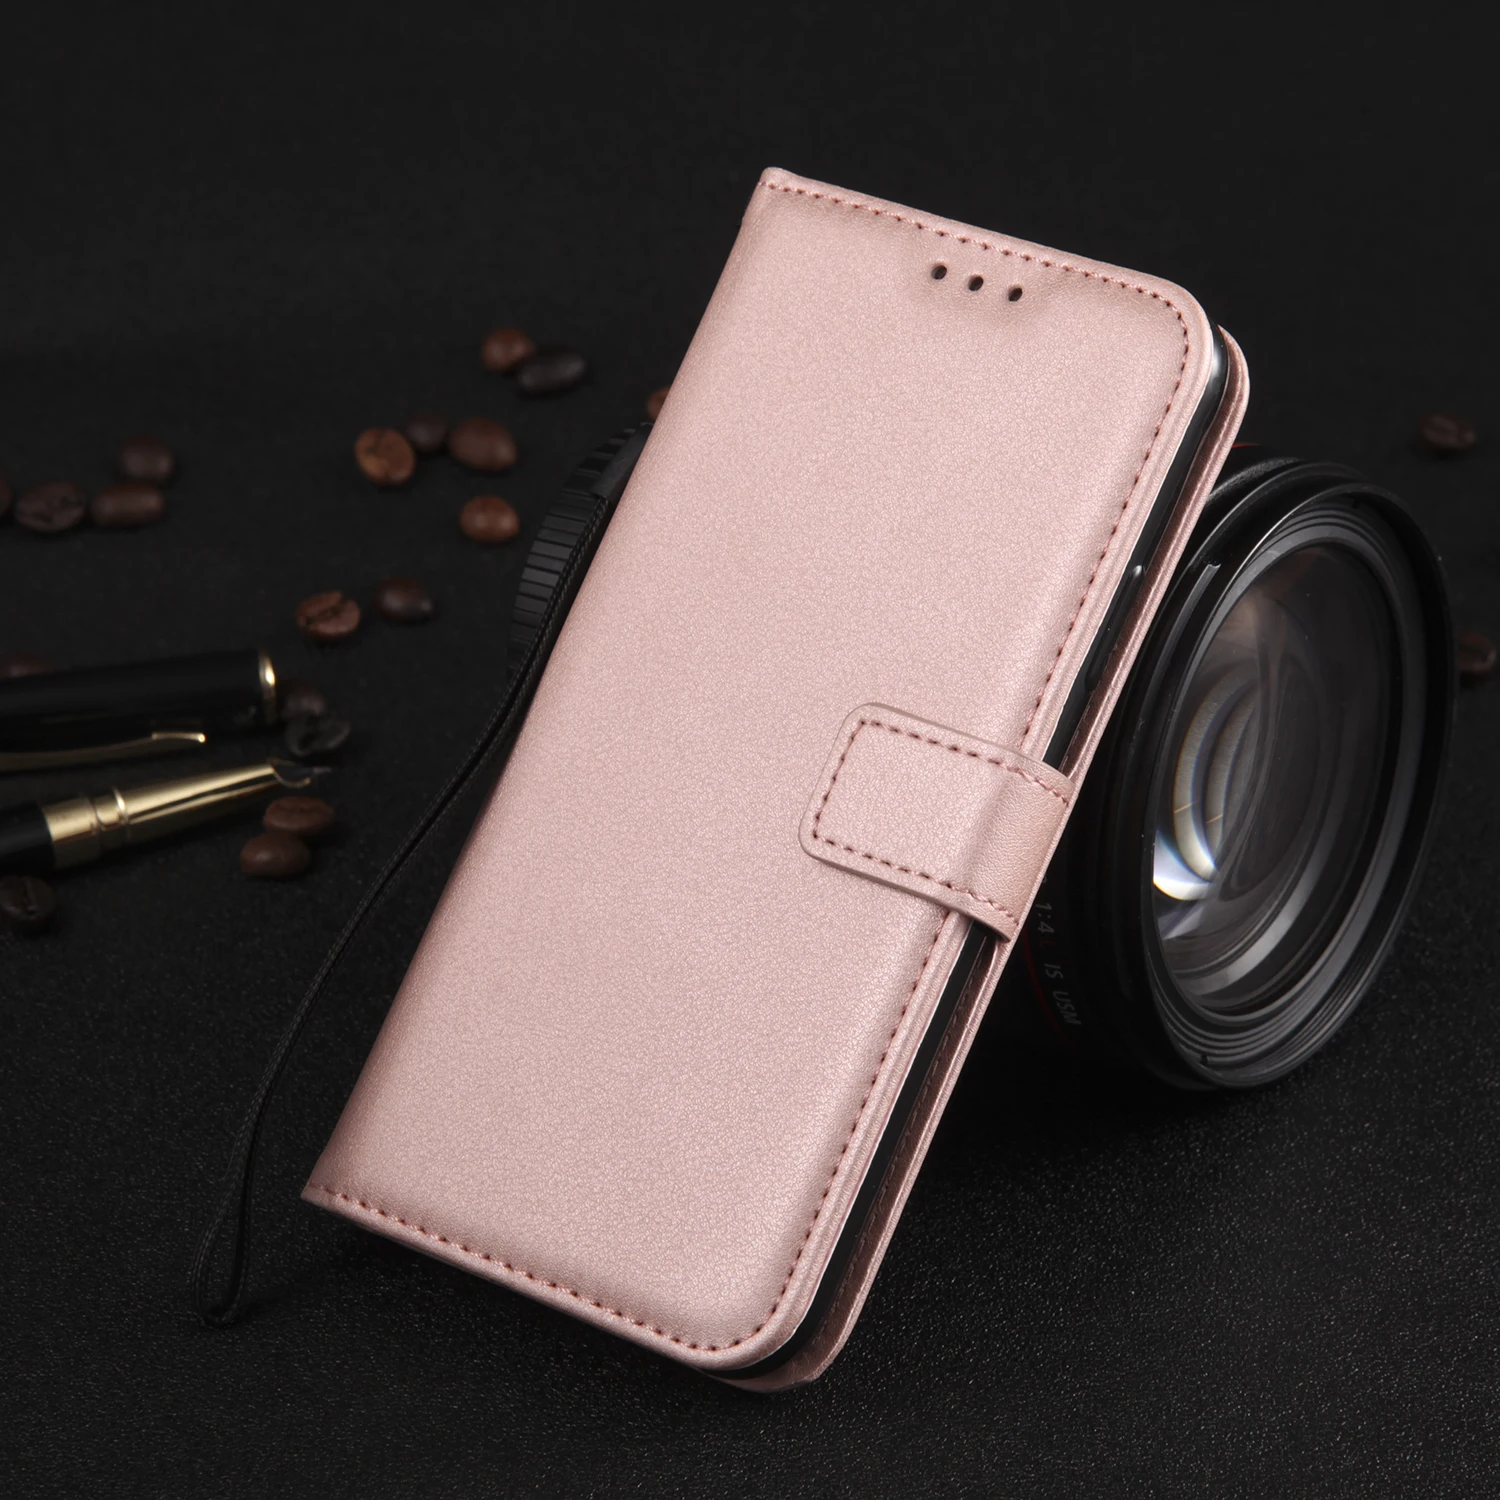 samsung silicone cover Leather Flip Wallet Case For Samsung Galaxy A10 A12 A20e A31 A02s A40 A41 A50 A51 A52 A70 A71 A21s A3 A5 A6 A7 A8 Protect Cover kawaii samsung phone cases Cases For Samsung